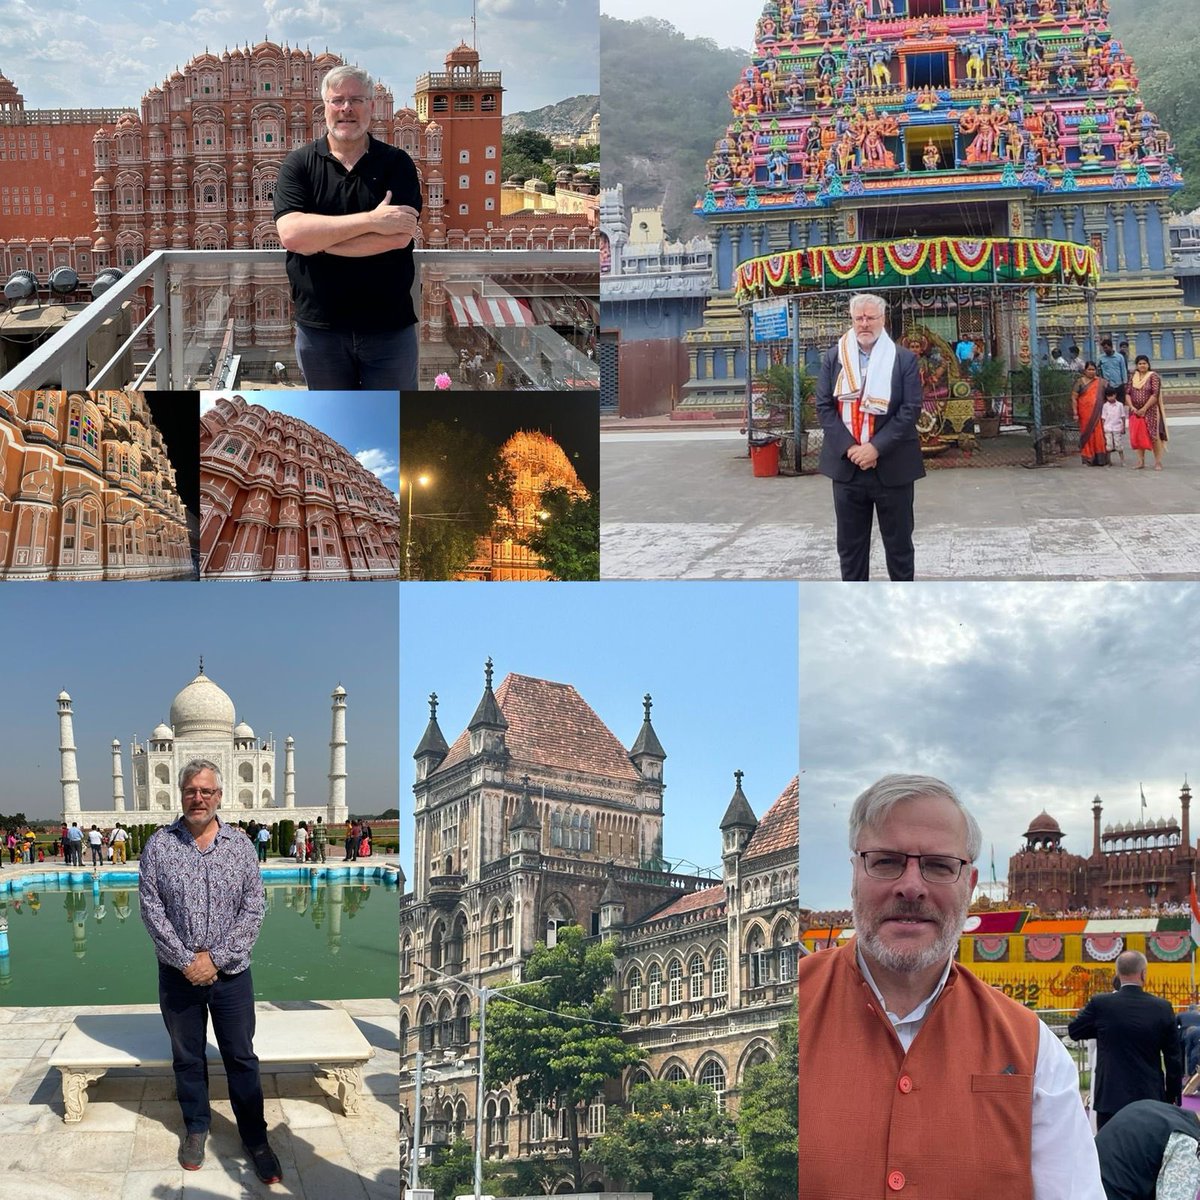 Happy #WorldHeritageDay! #India 🇮🇳 & #Israel 🇮🇱 have glorious history, heritage, tradition, and rich culture. From the majestic beauty of the Taj Mahal to the breathtaking Ajanta Caves, I had the opportunity to explore some of these timeless treasures of #IncredibleIndia.